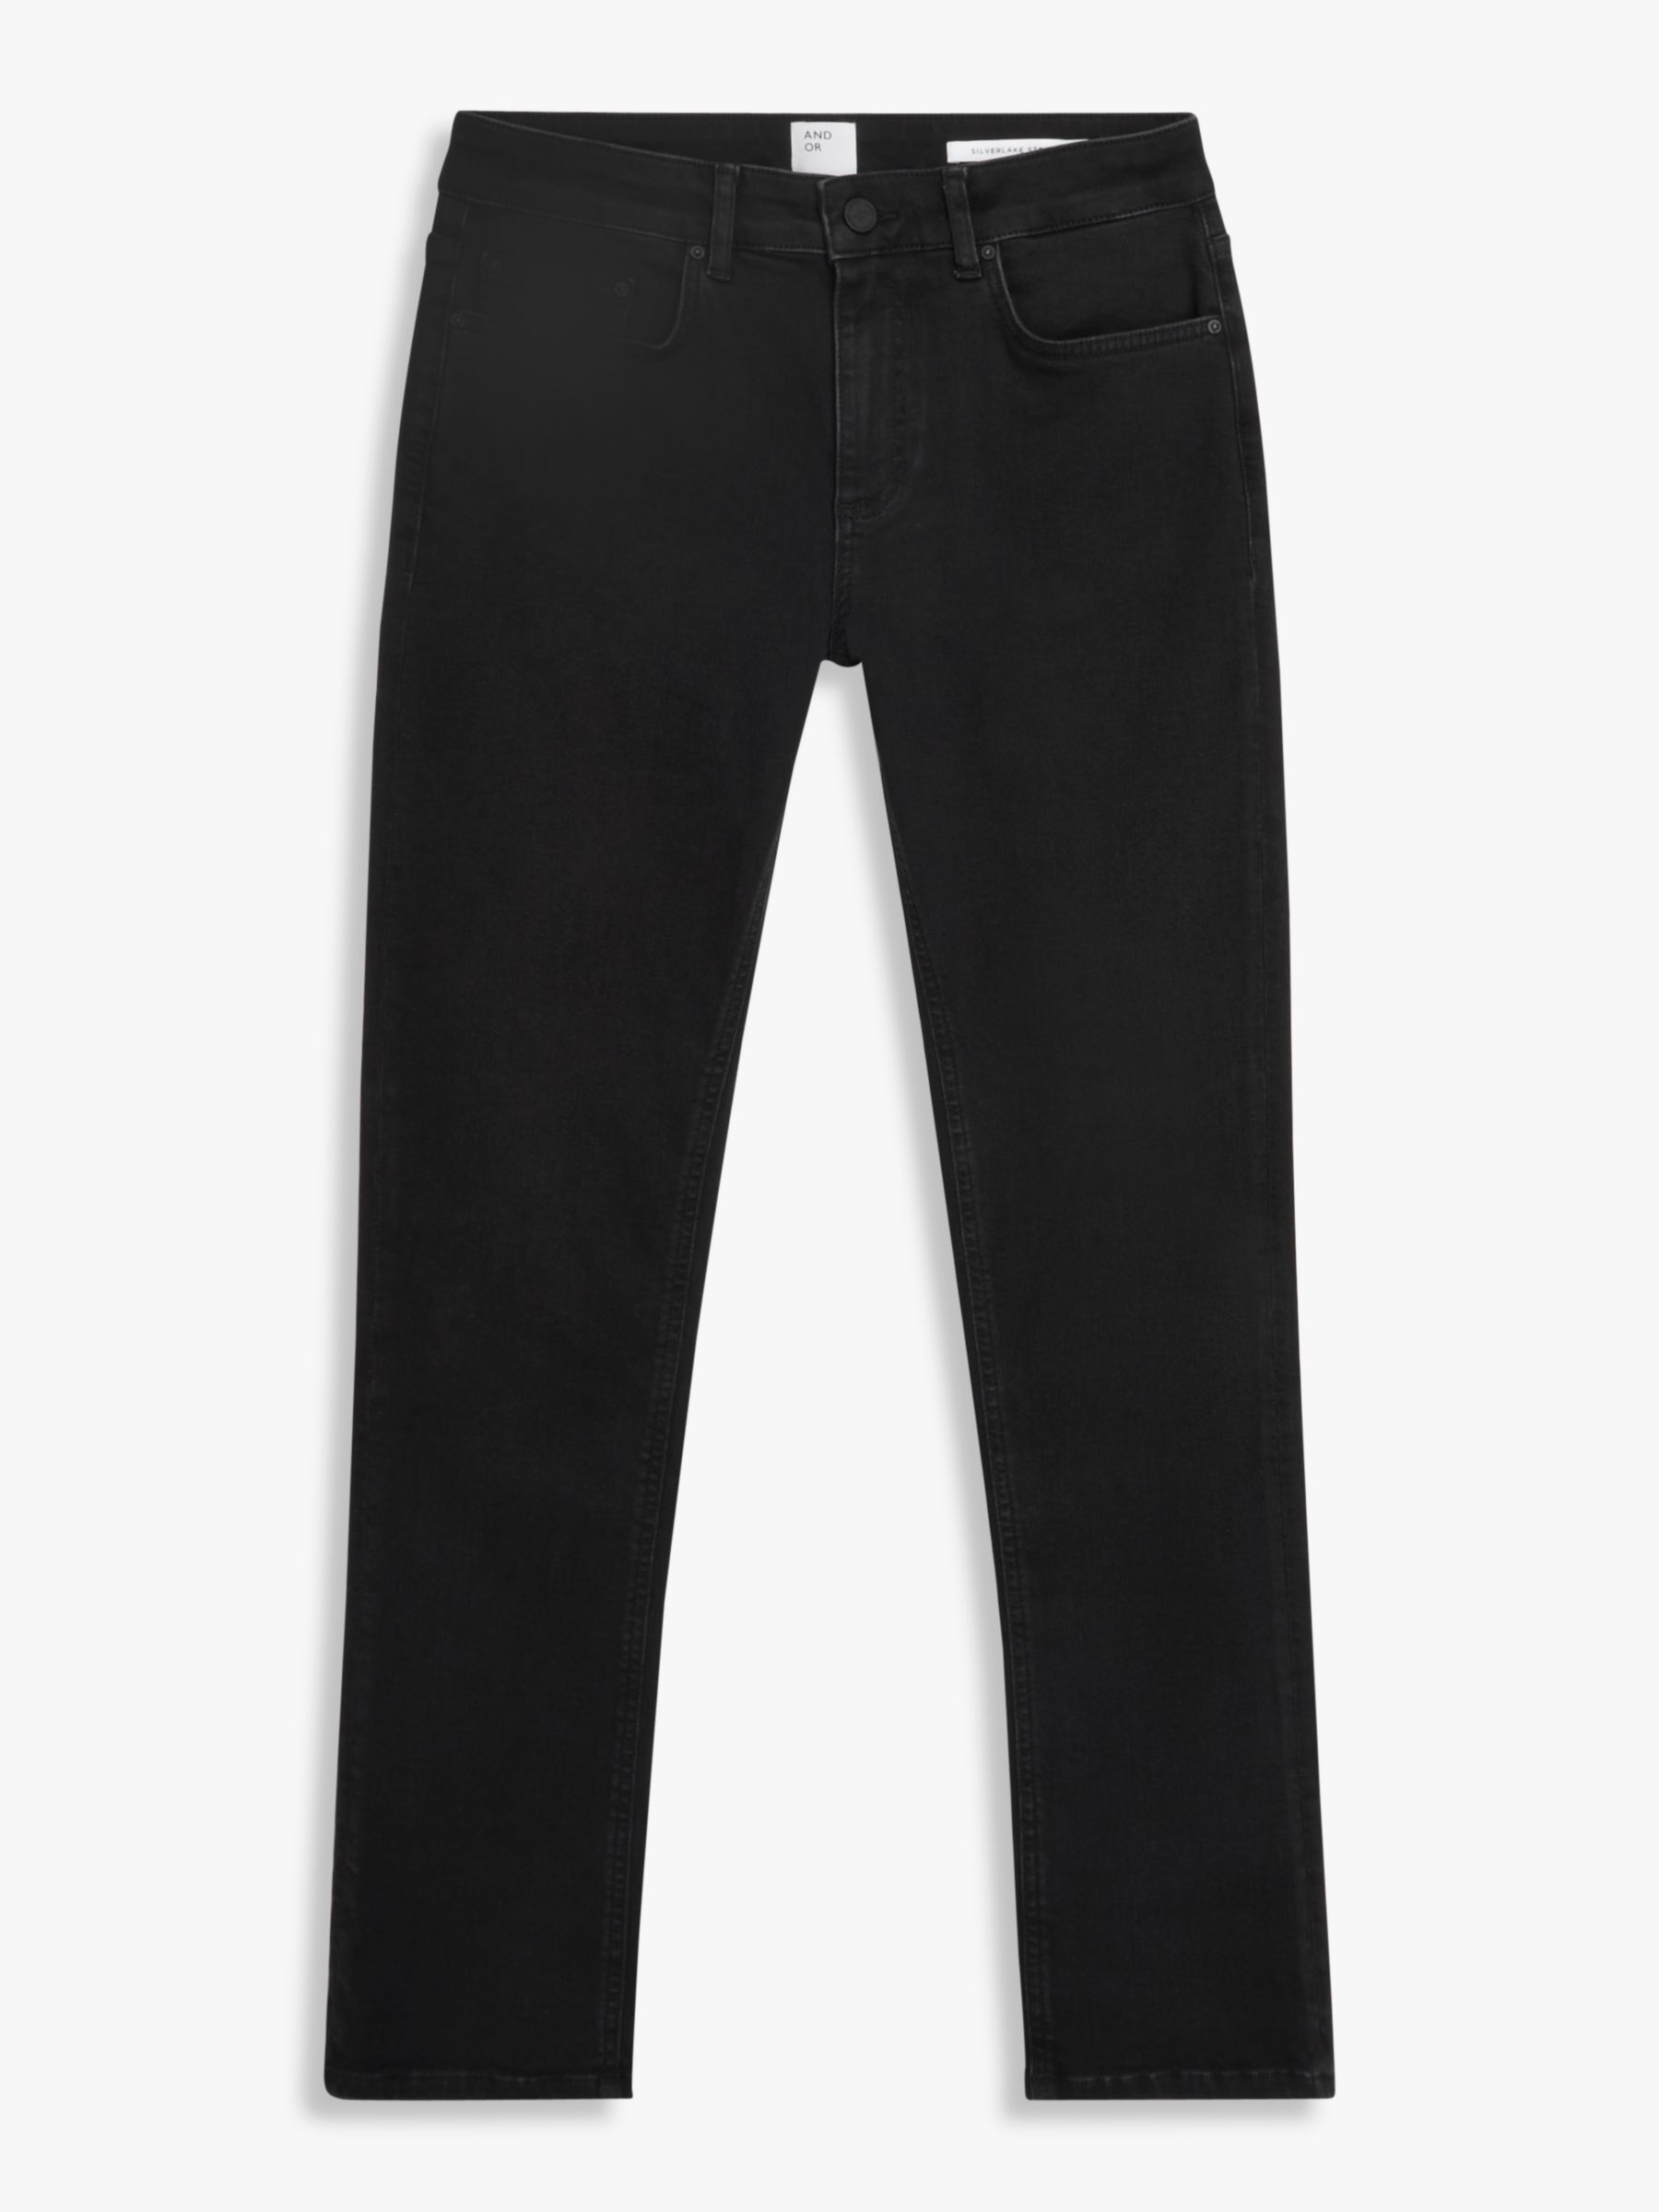 AND/OR Silverlake Straight Cut Jeans, Washed Black, 34R